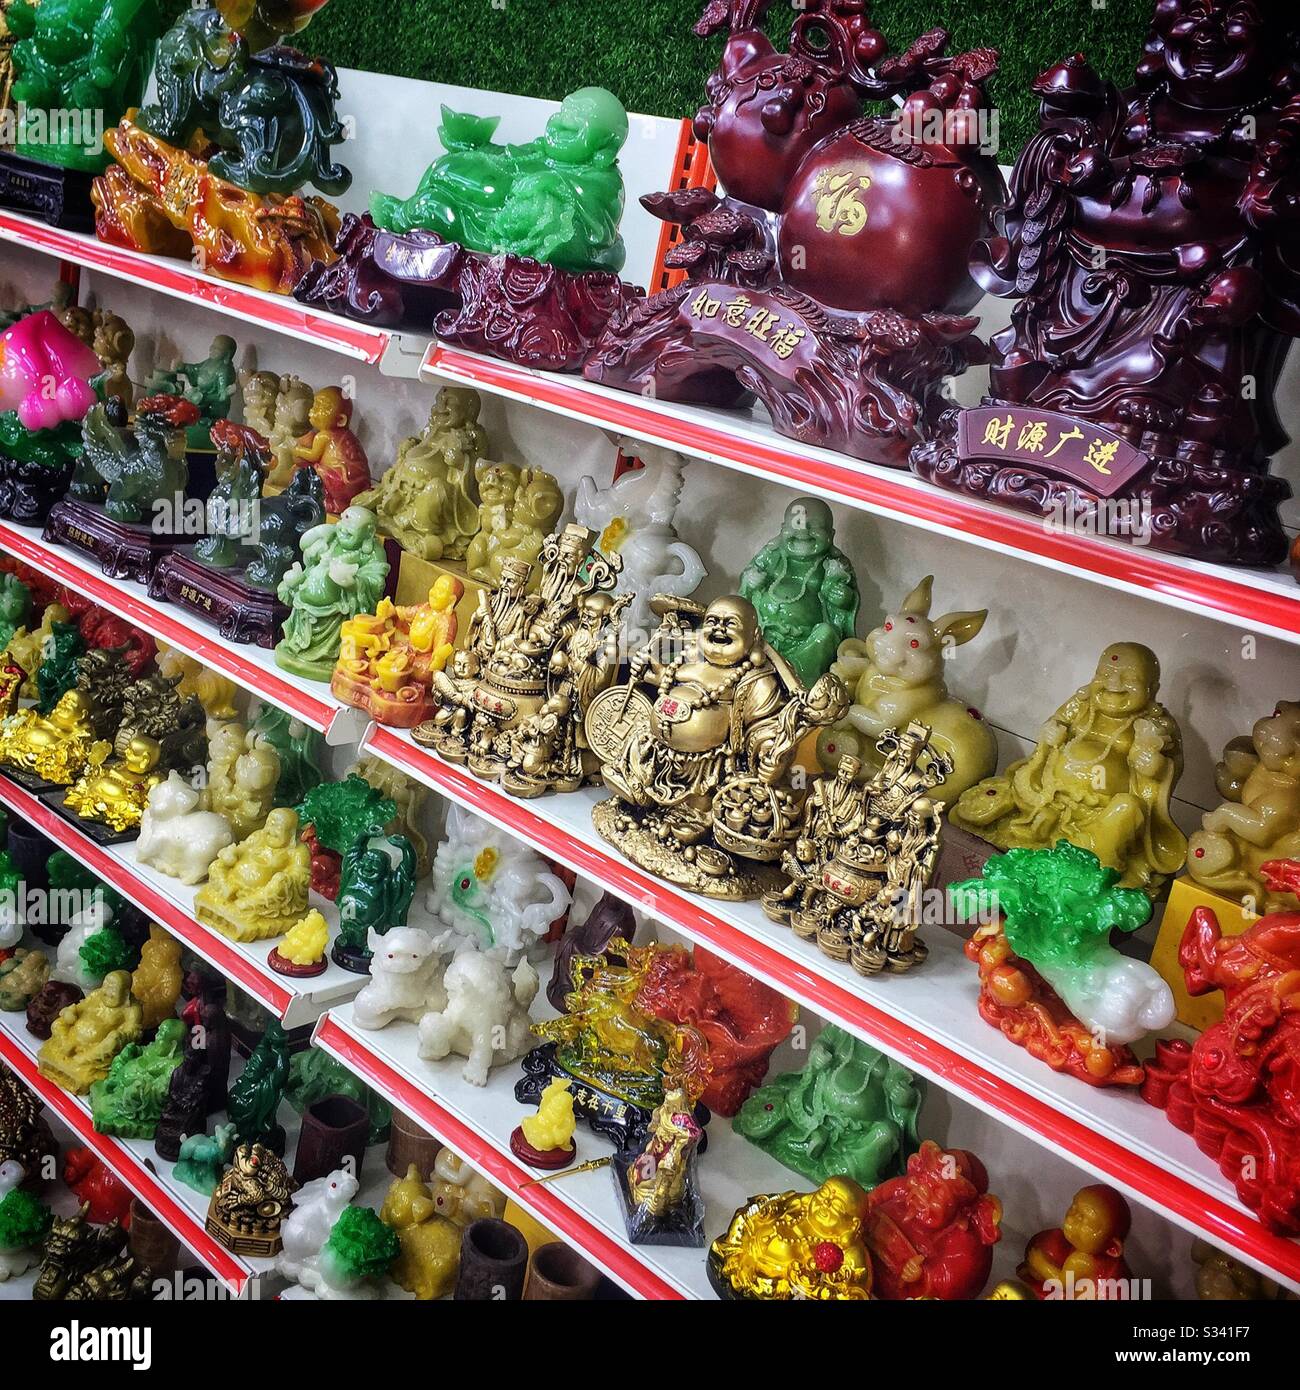 Laughing Buddhas and other ornaments for good luck for sale in a souvenir shop in Jalan Alor, a hawker food market in Bukit Bintang, Kuala Lumpur, Malaysia Stock Photo